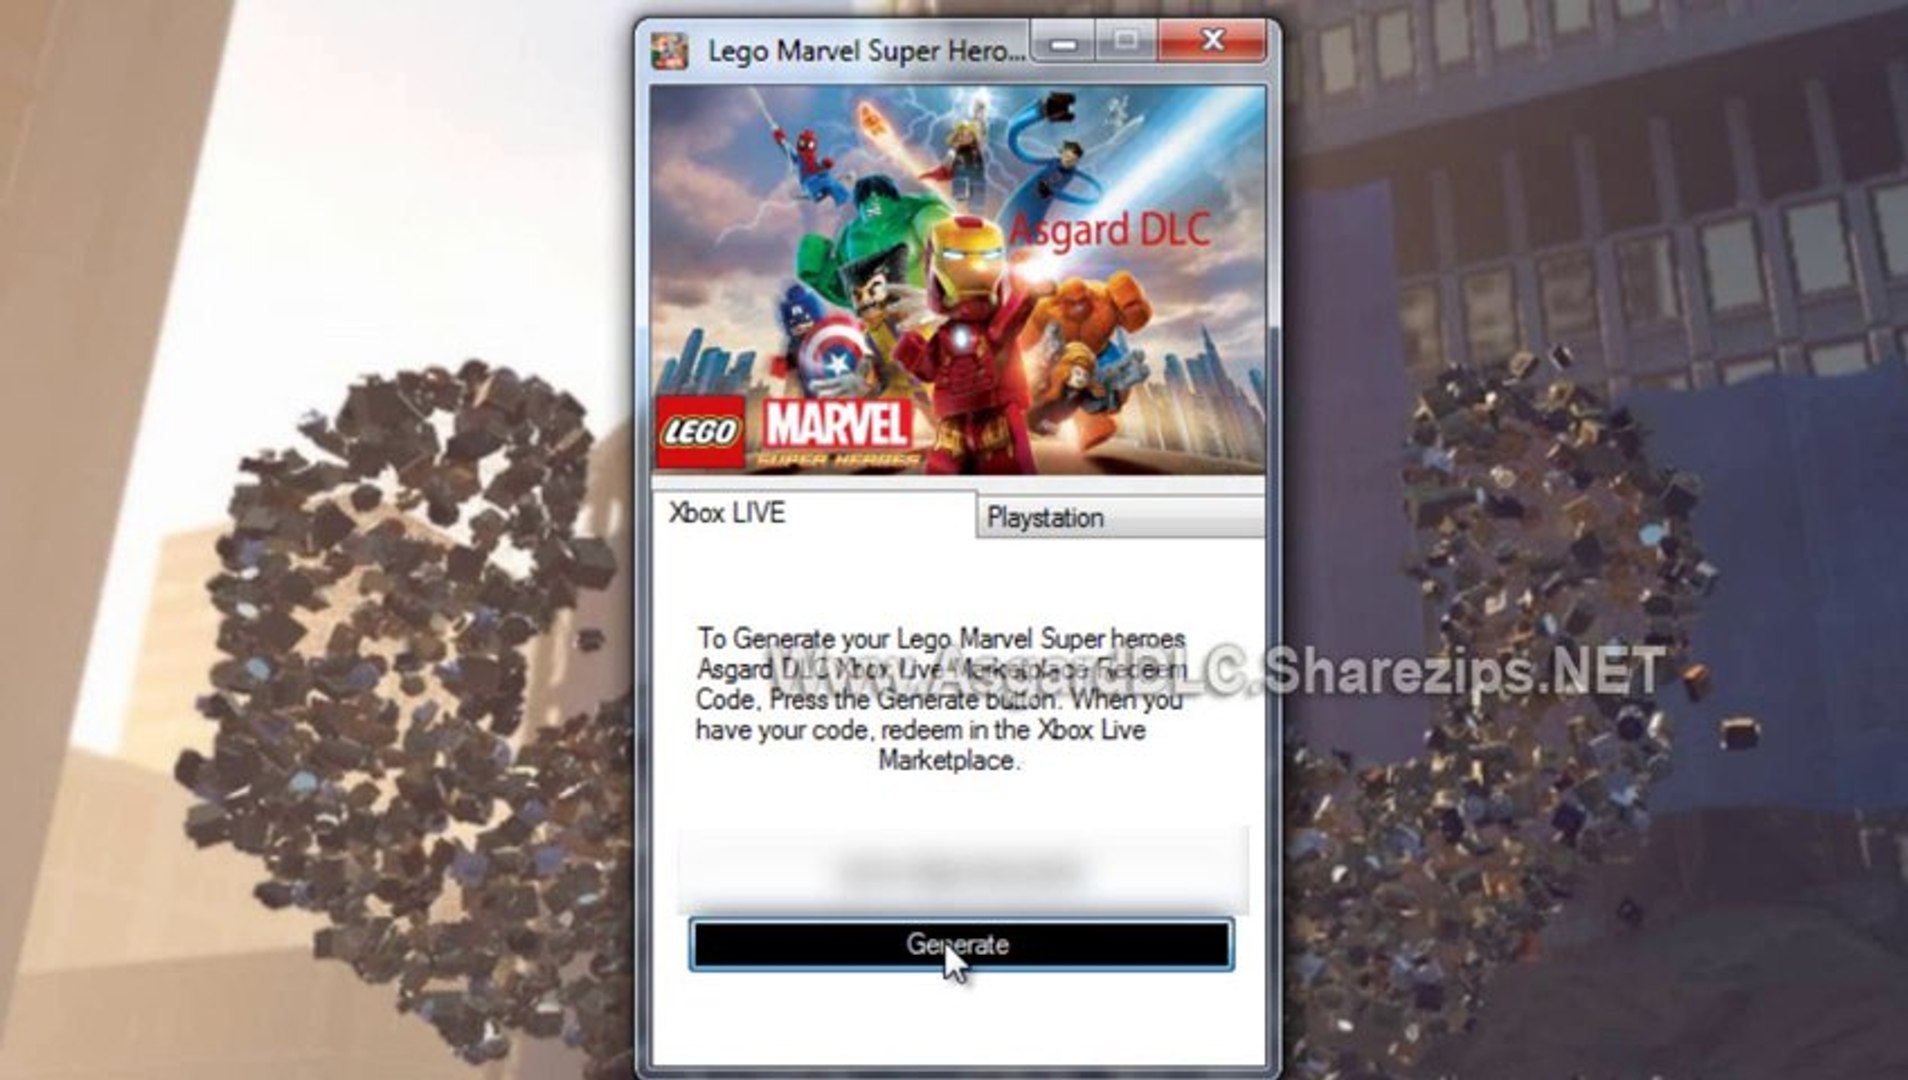 Get Lego Marvel Super Heroes Asgard DLC Code for FREE - video Dailymotion